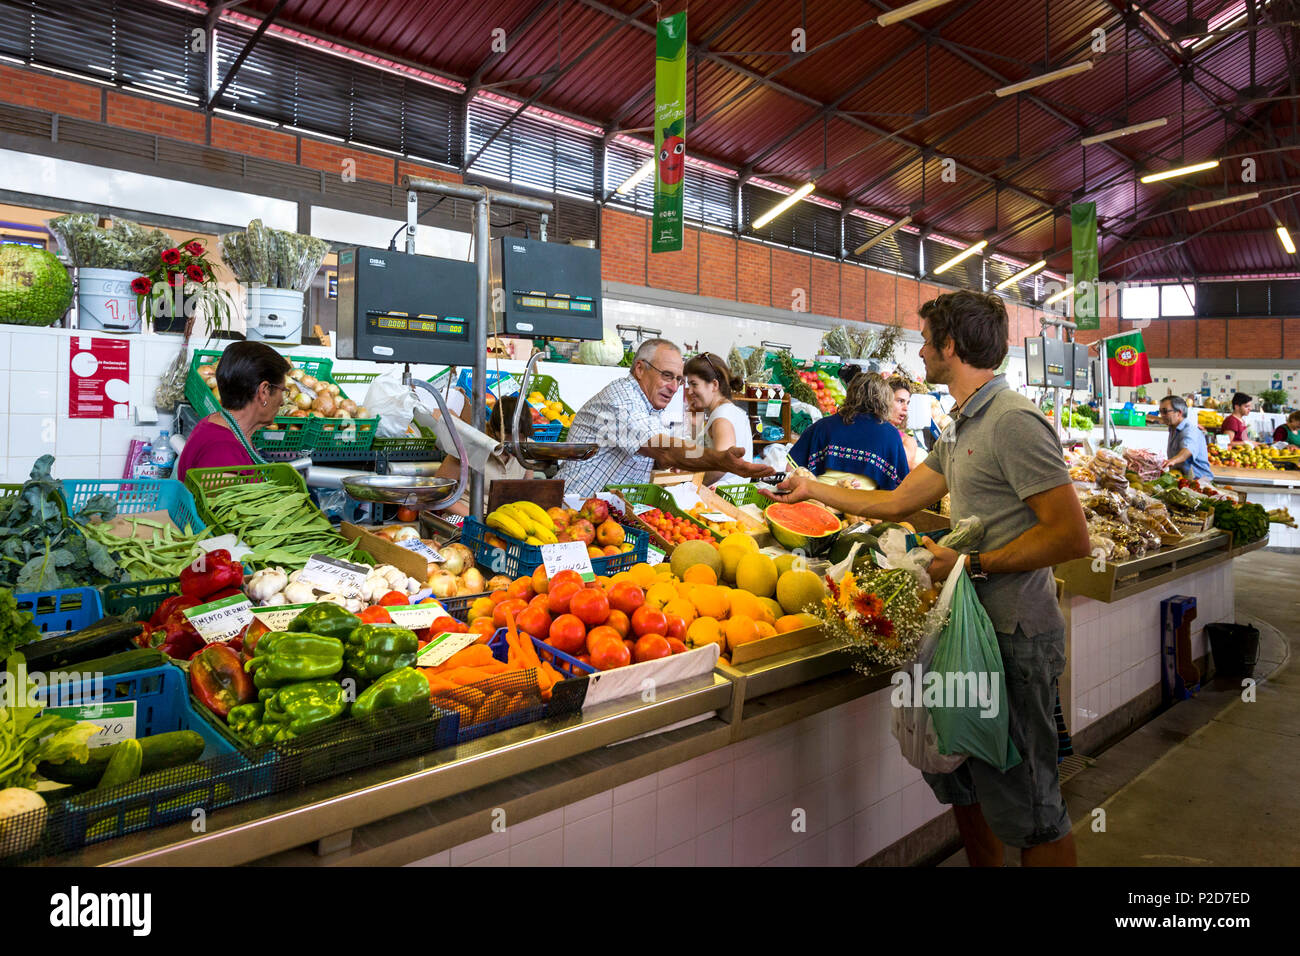 Vegetable stall in the Market hall, Olhao, Algarve, Portugal Stock Photo